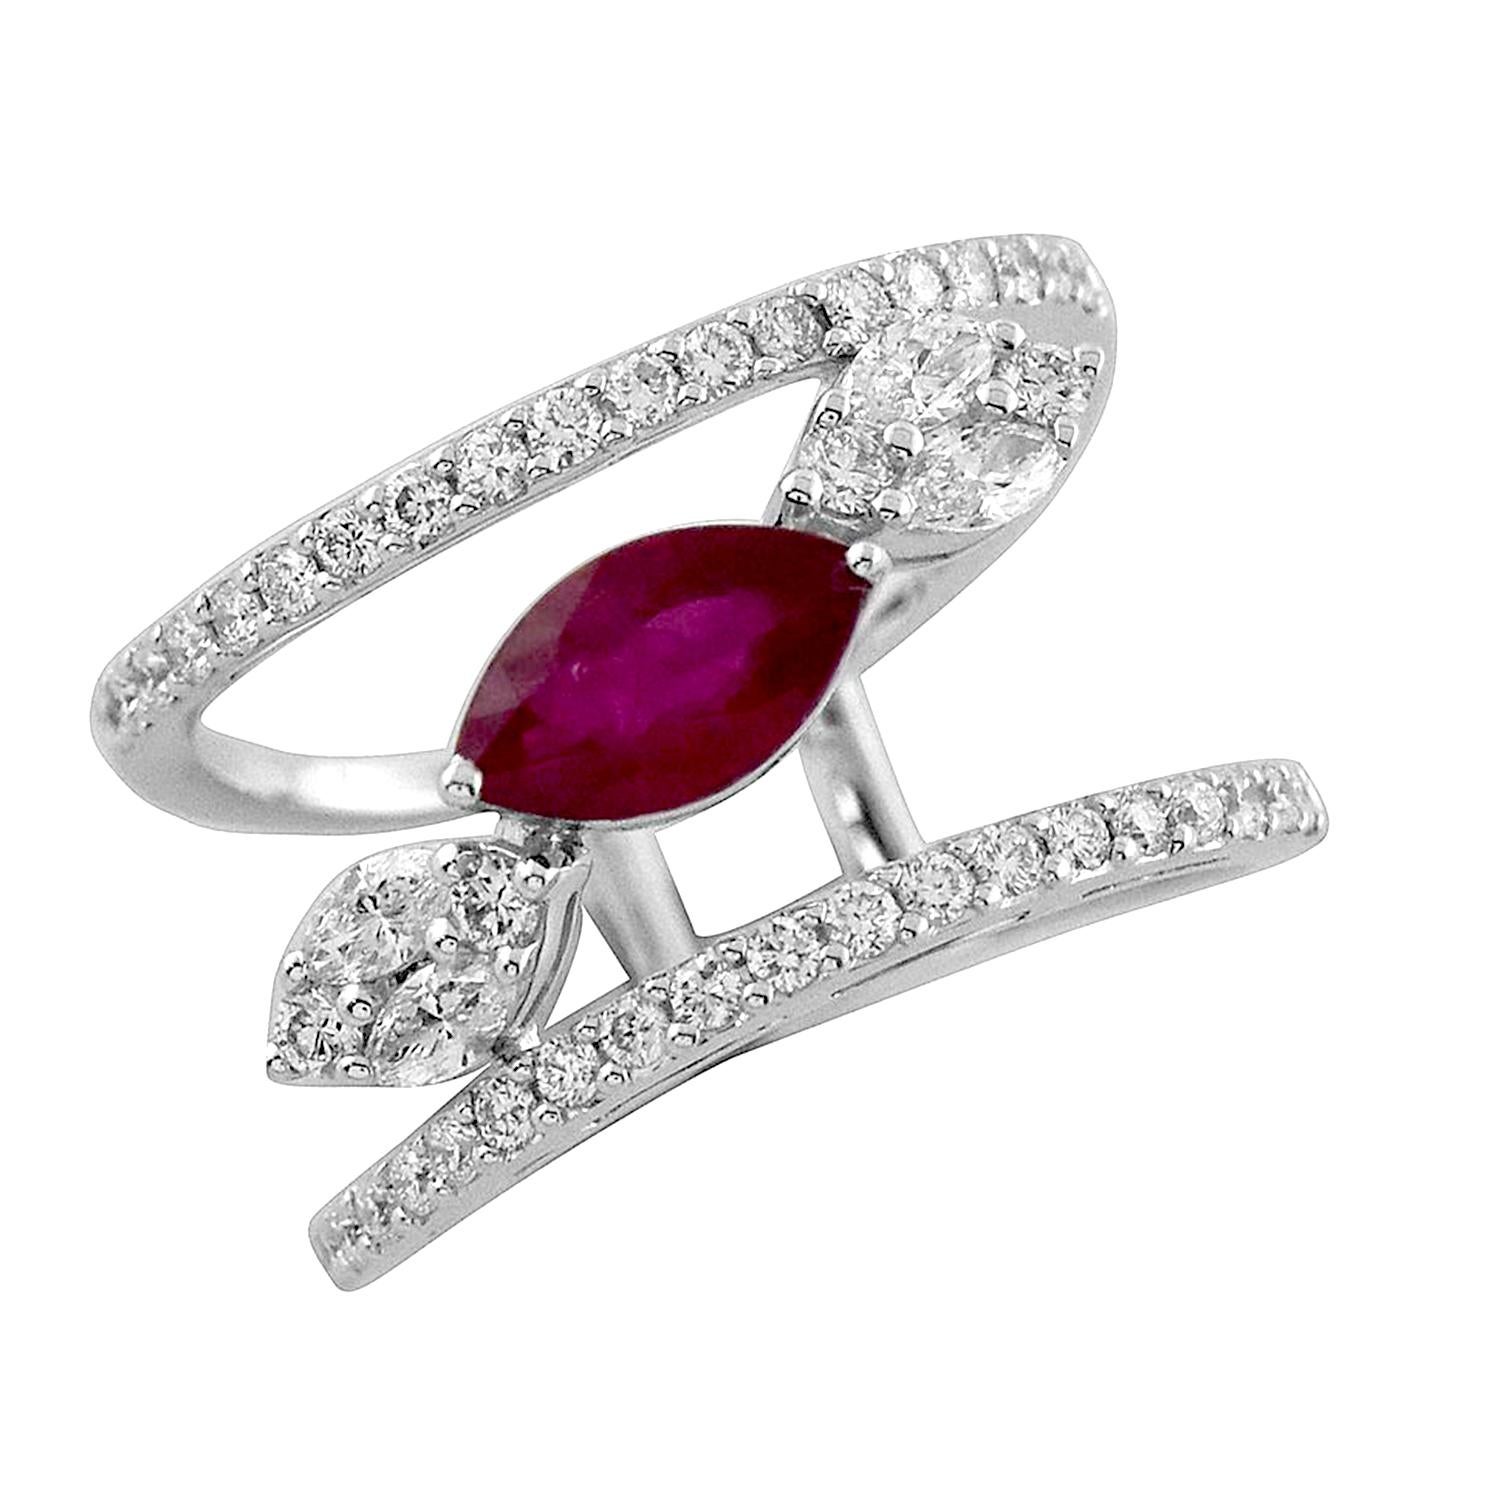 Contemporary 1.03 Ct Marquise Shaped Ruby Wide Ring With Diamonds Made In 18k White Gold For Sale